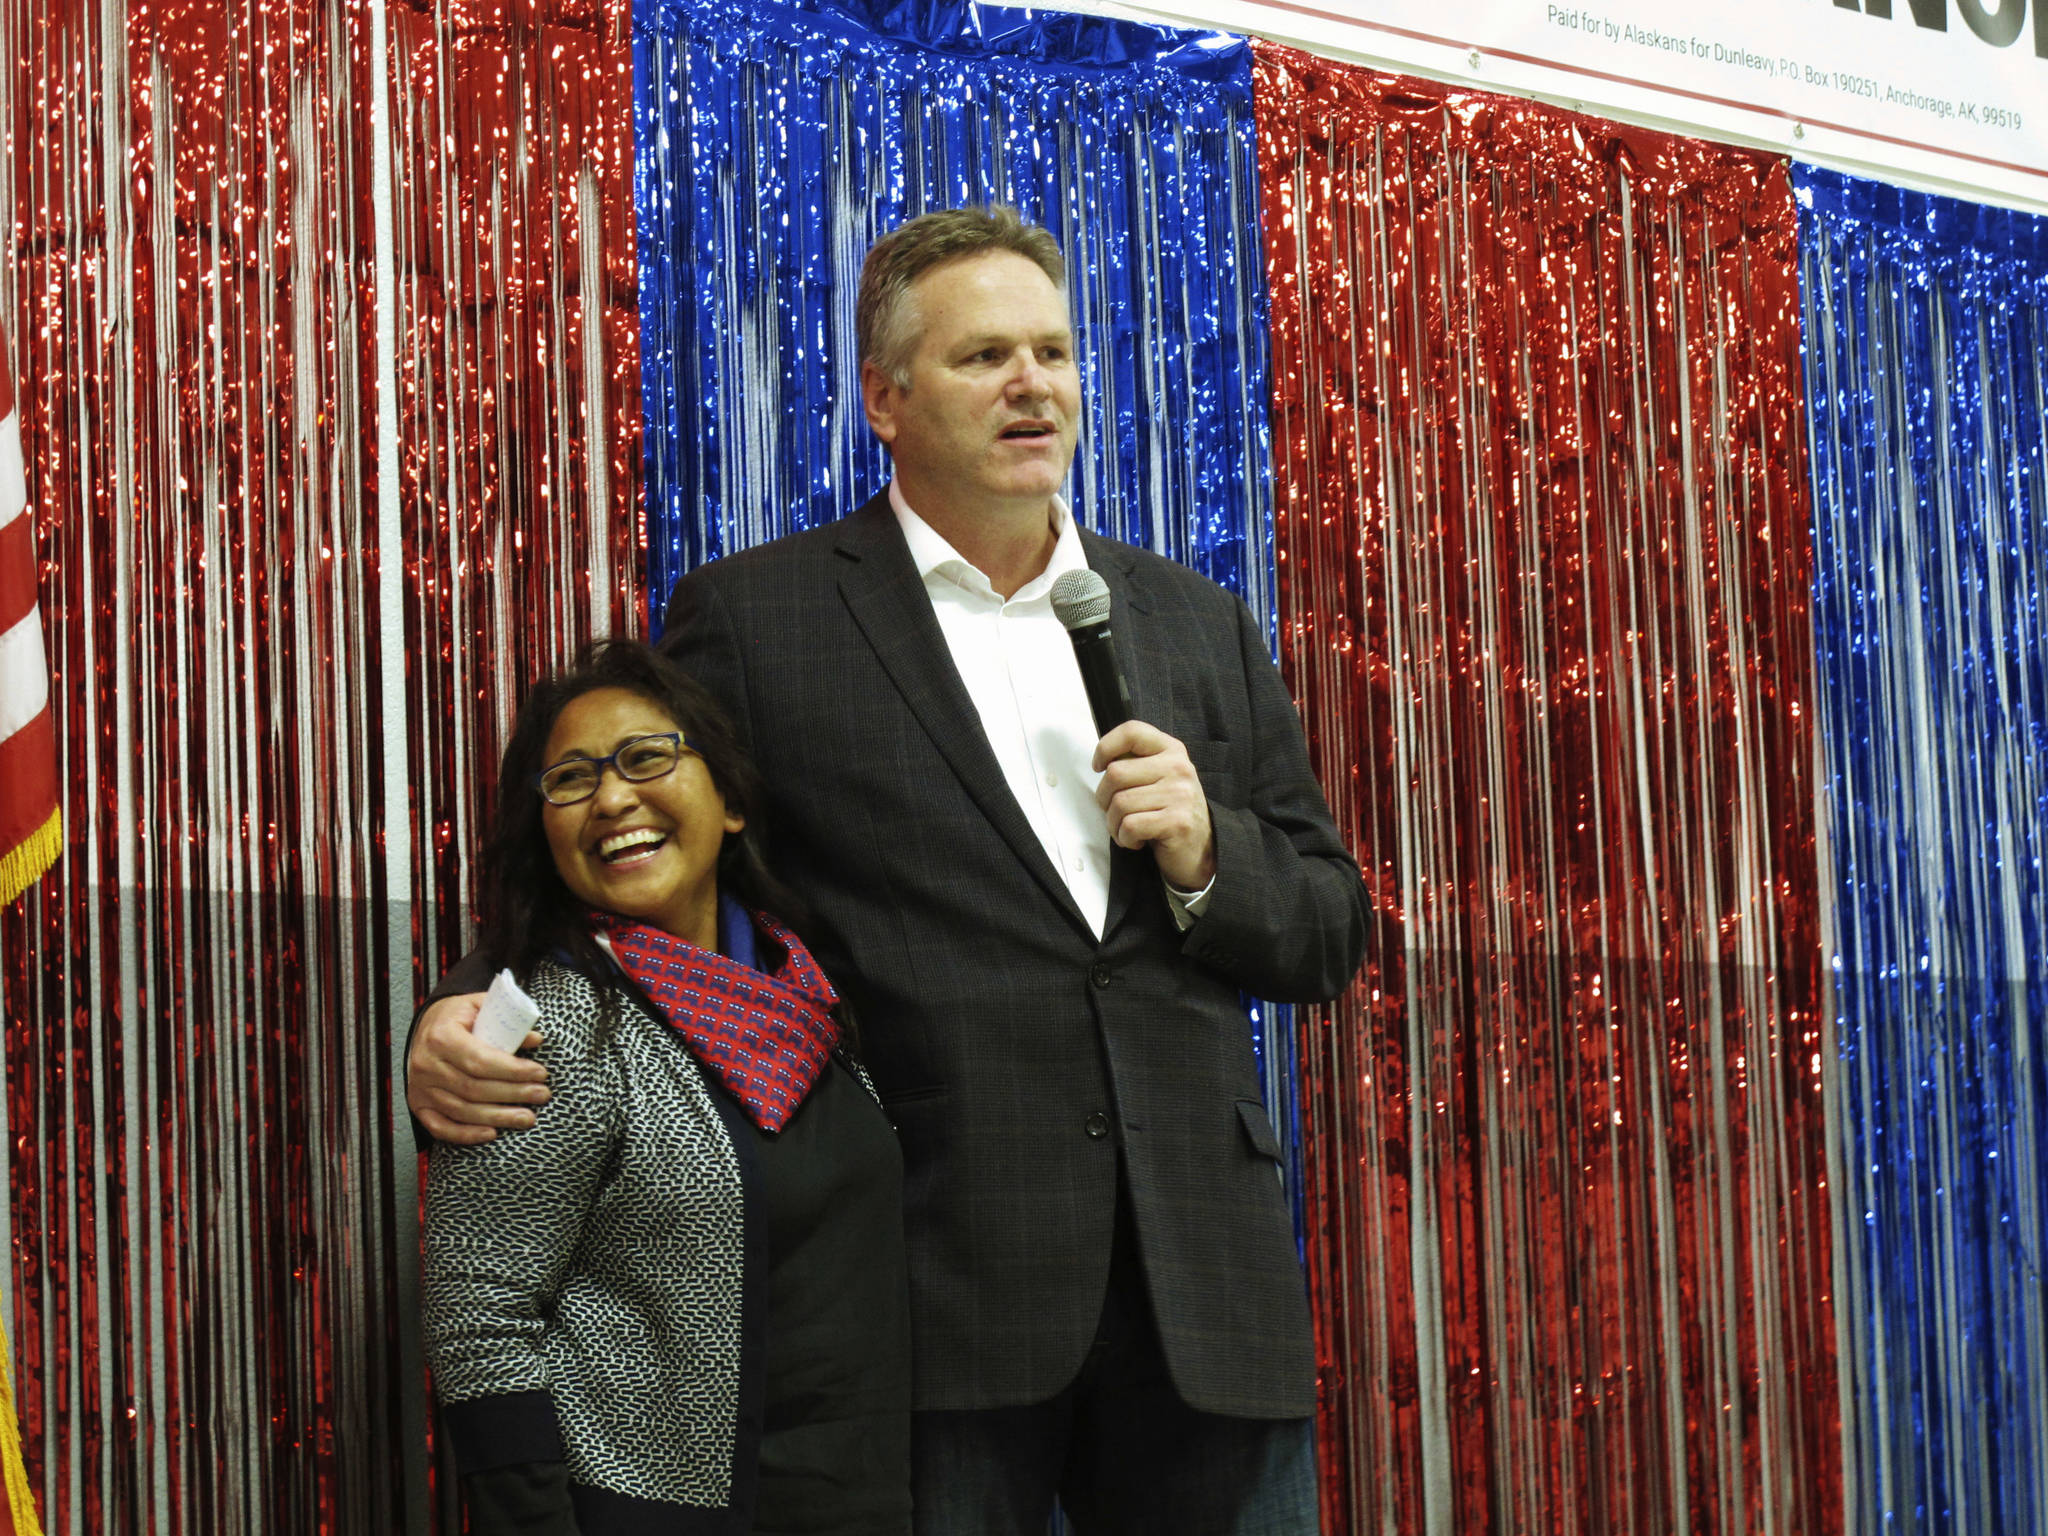 In this Nov. 4, 2018 file photo, Alaska Republican gubernatorial candidate Mike Dunleavy stands with his wife, Rose, on stage during a GOP rally in Anchorage, Alaska. Alaska Gov.-elect Mike Dunleavy takes office Monday, Dec. 3, days after a magnitude 7.0 earthquake rocked heavily-populated south-central Alaska. (AP Photo/Becky Bohrer, File)